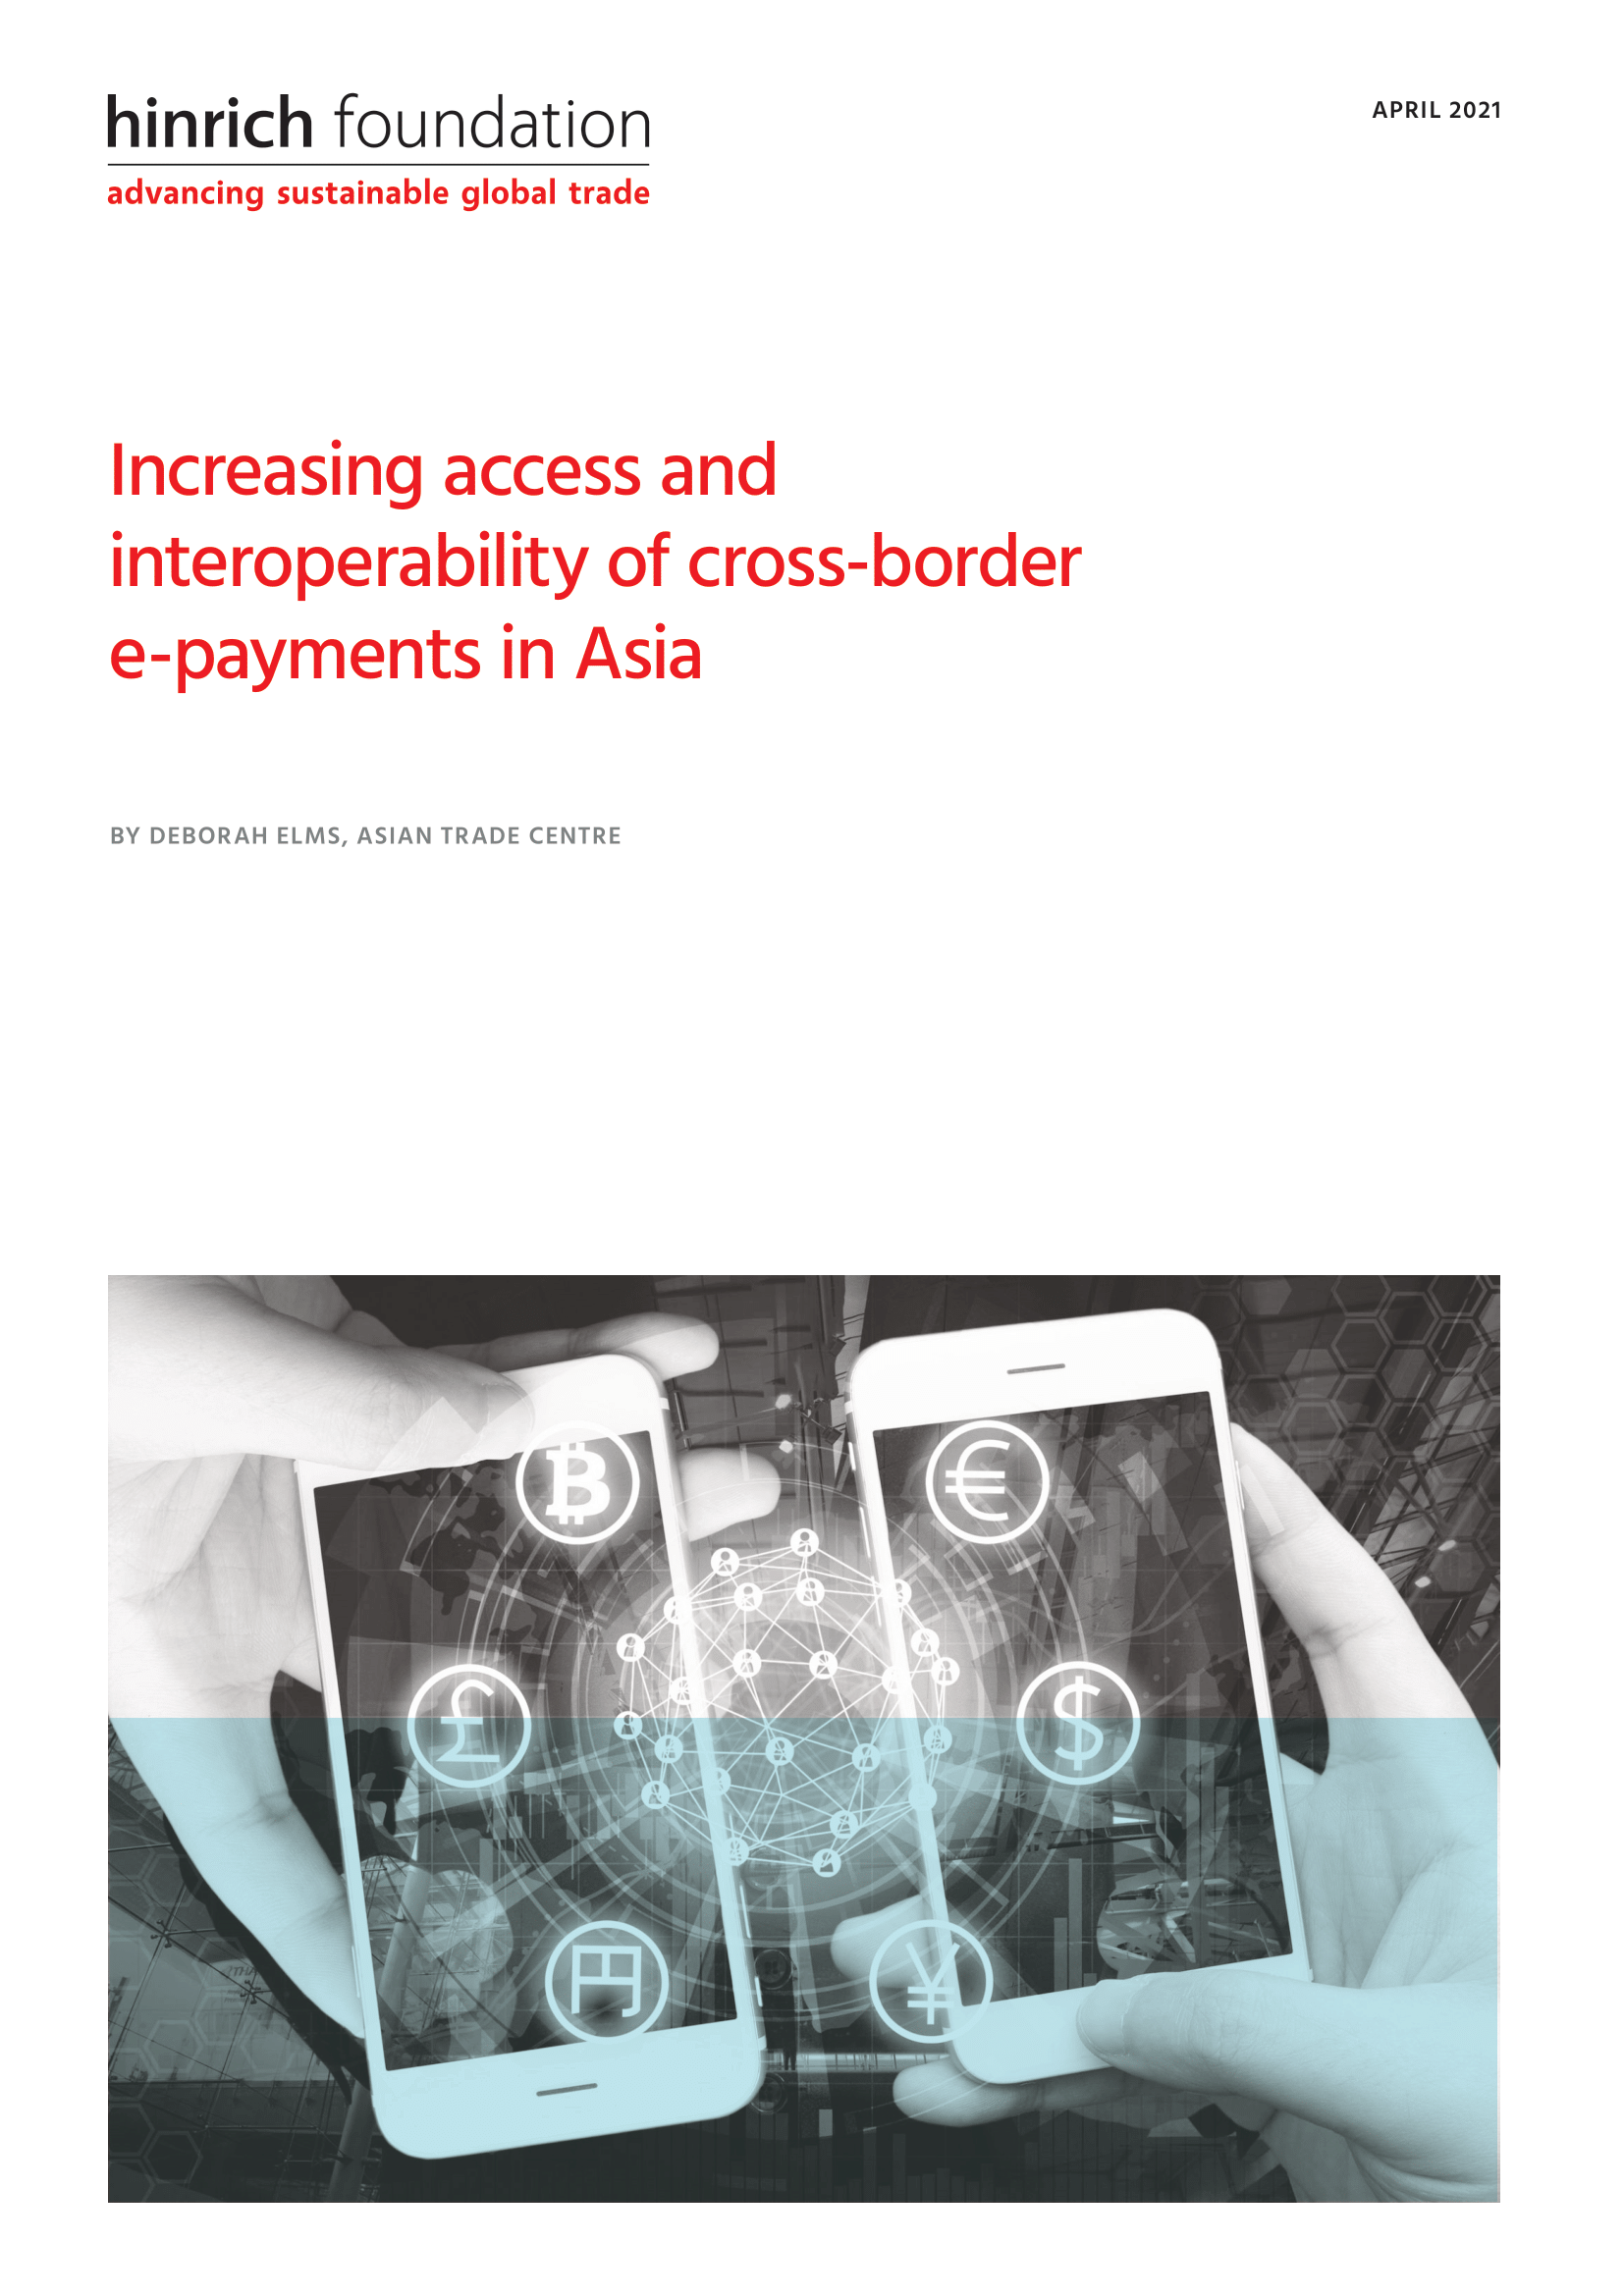 E-payments+in+Asia_Hinrich+Foundation-01.png